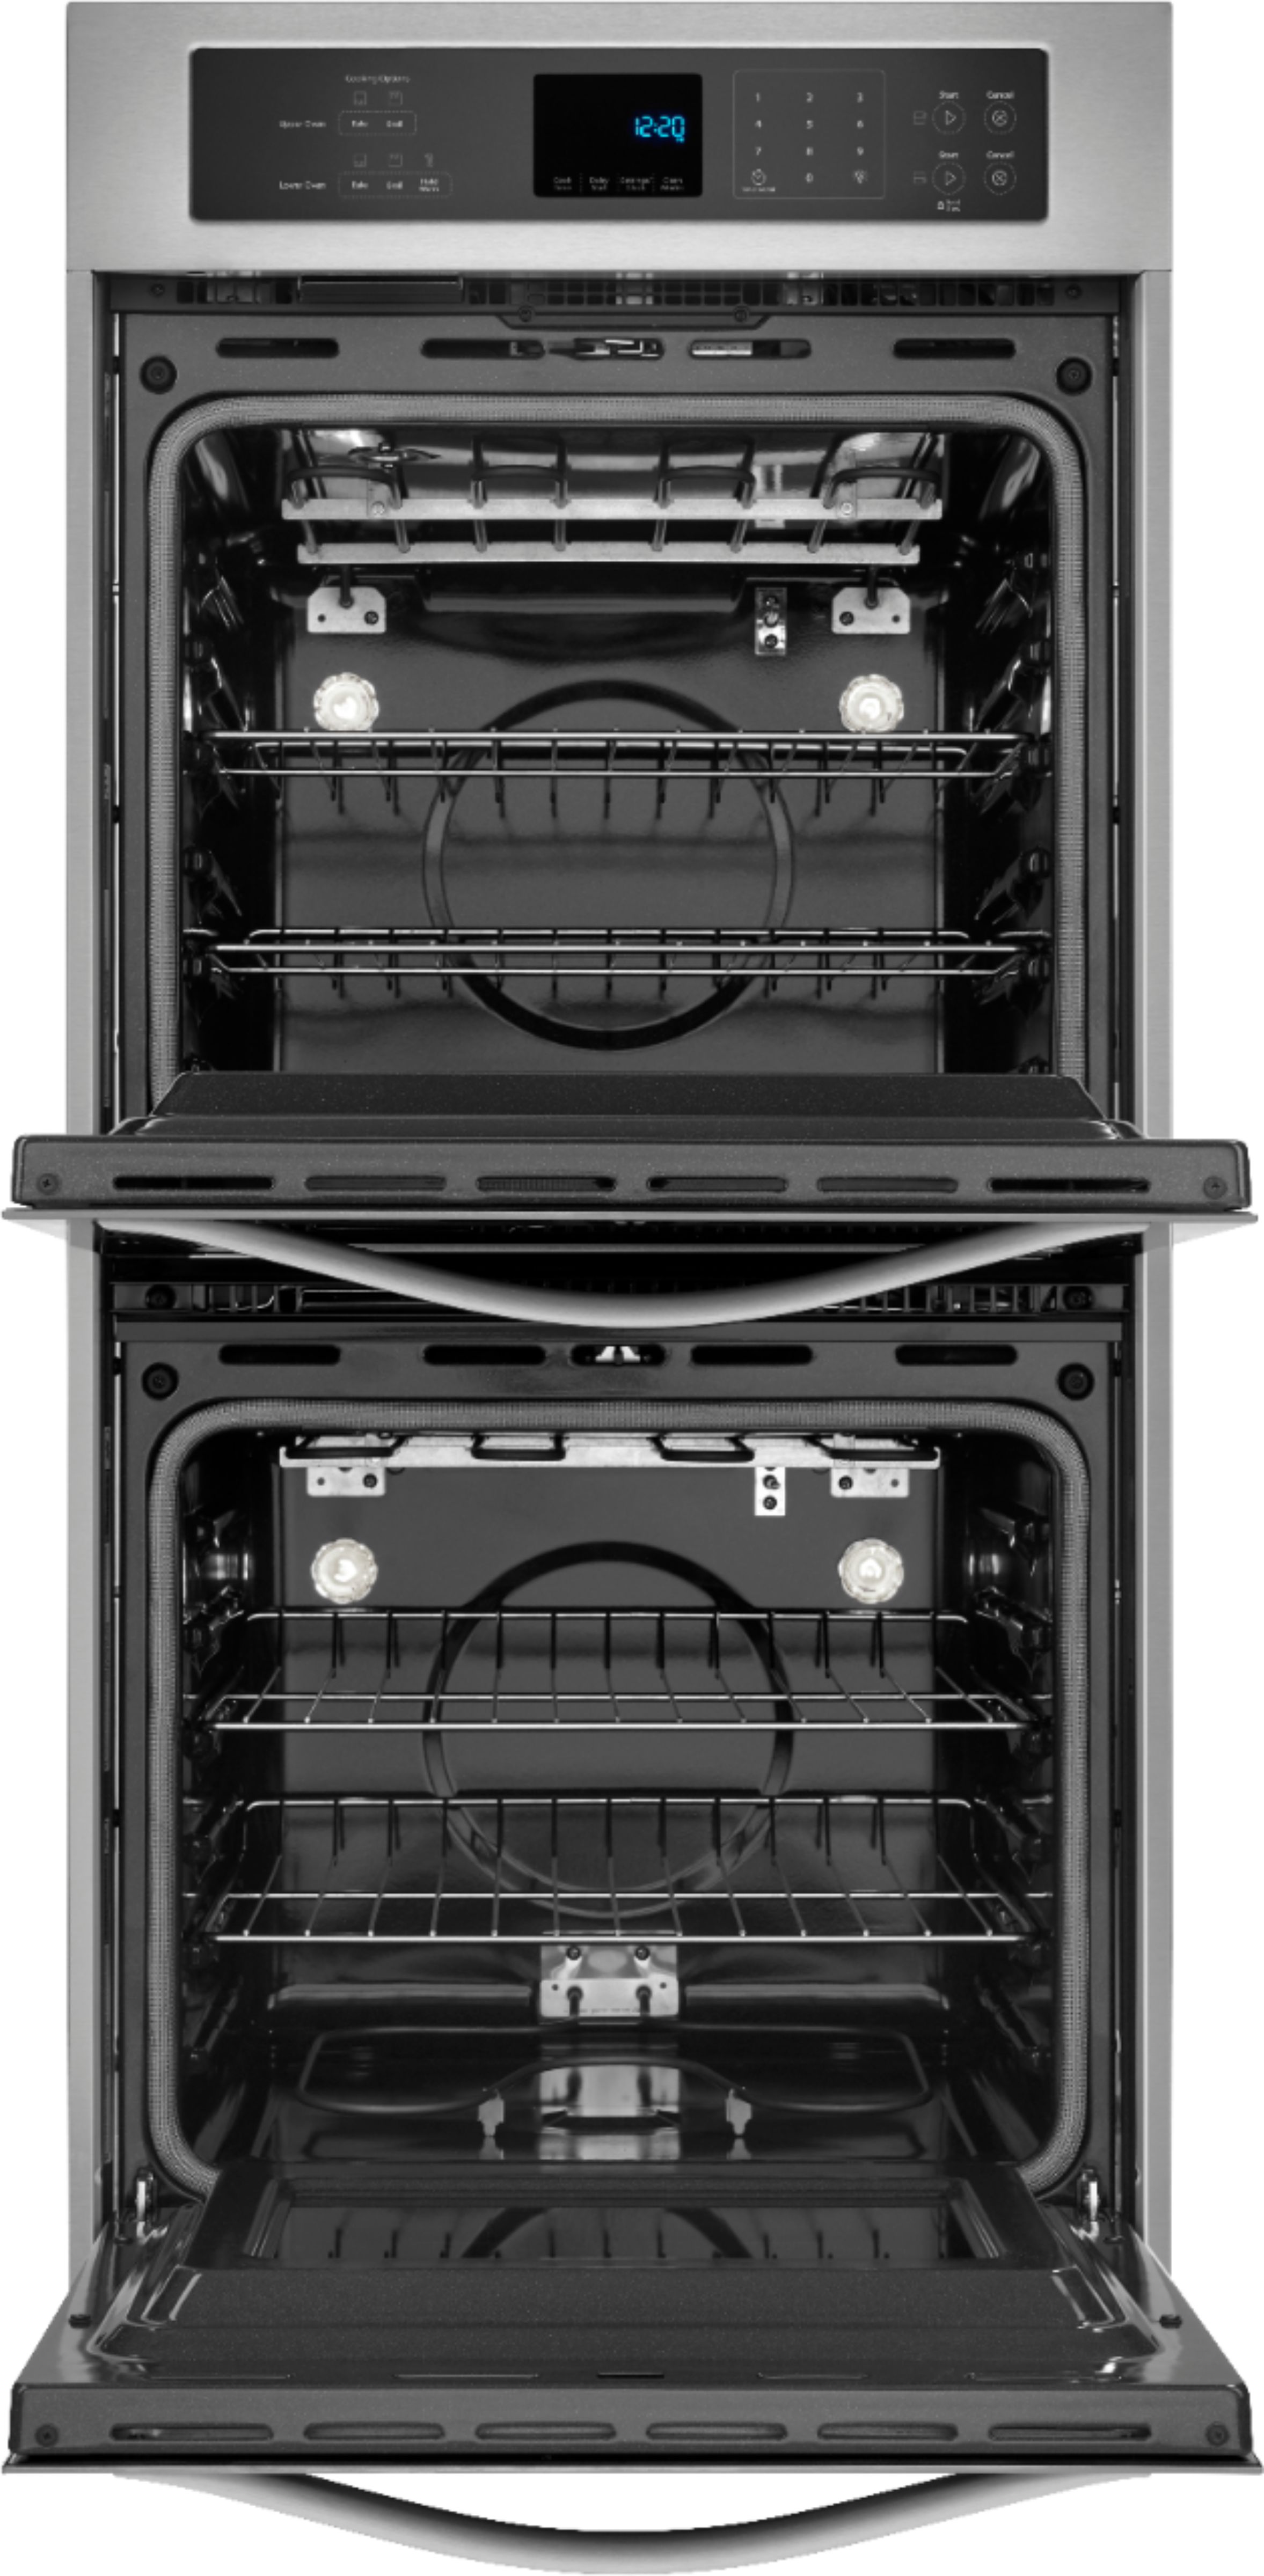 Is a Double Wall Oven Worth It? - Simply Better Living